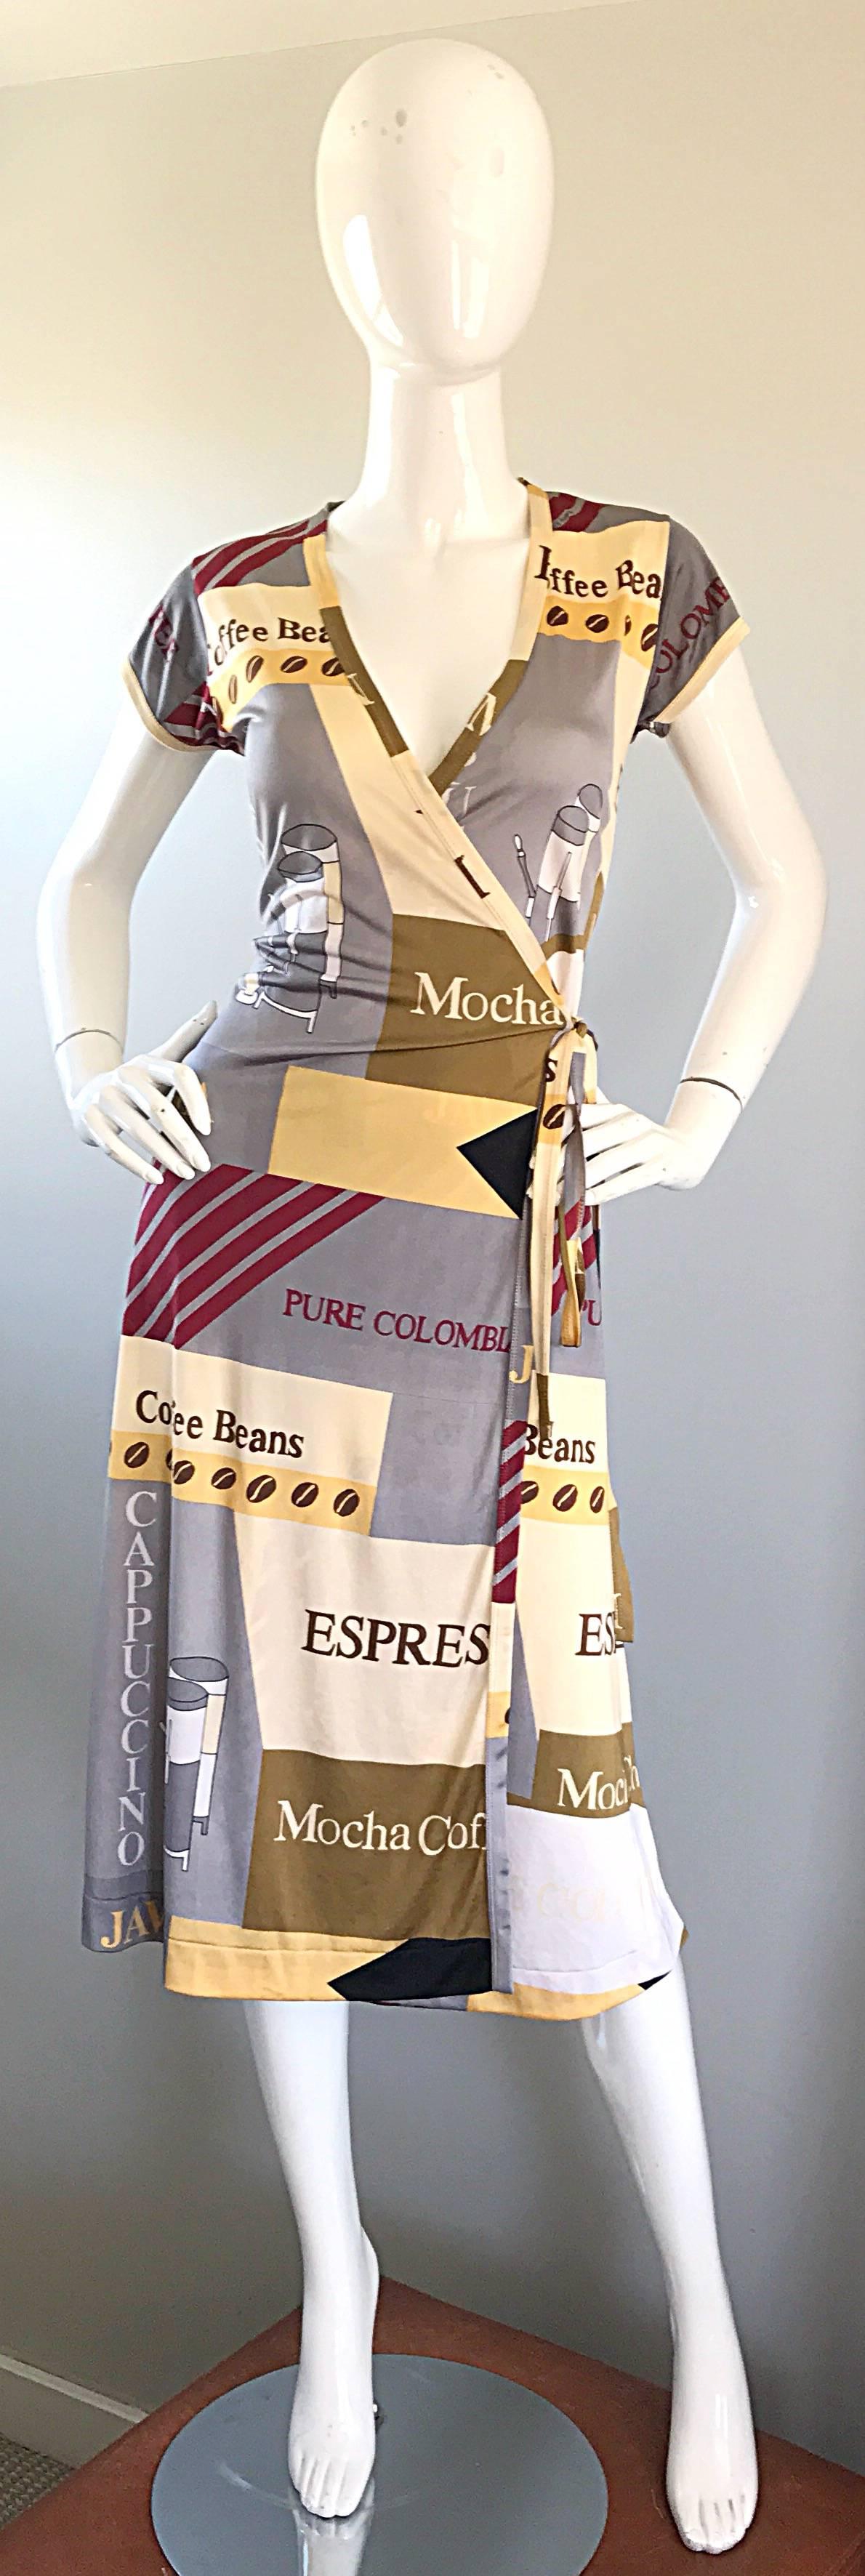 Incredible 1970s WAYNE ROGERS coffe / cafe novelty print wrap dress! Features coffee names, including Espresso, Cappuccino, Mocha, Pure Columbian, Coffee Beans, etc. throughout. Also has coffee cups, pots, espresso machines, etc. printed throughout.